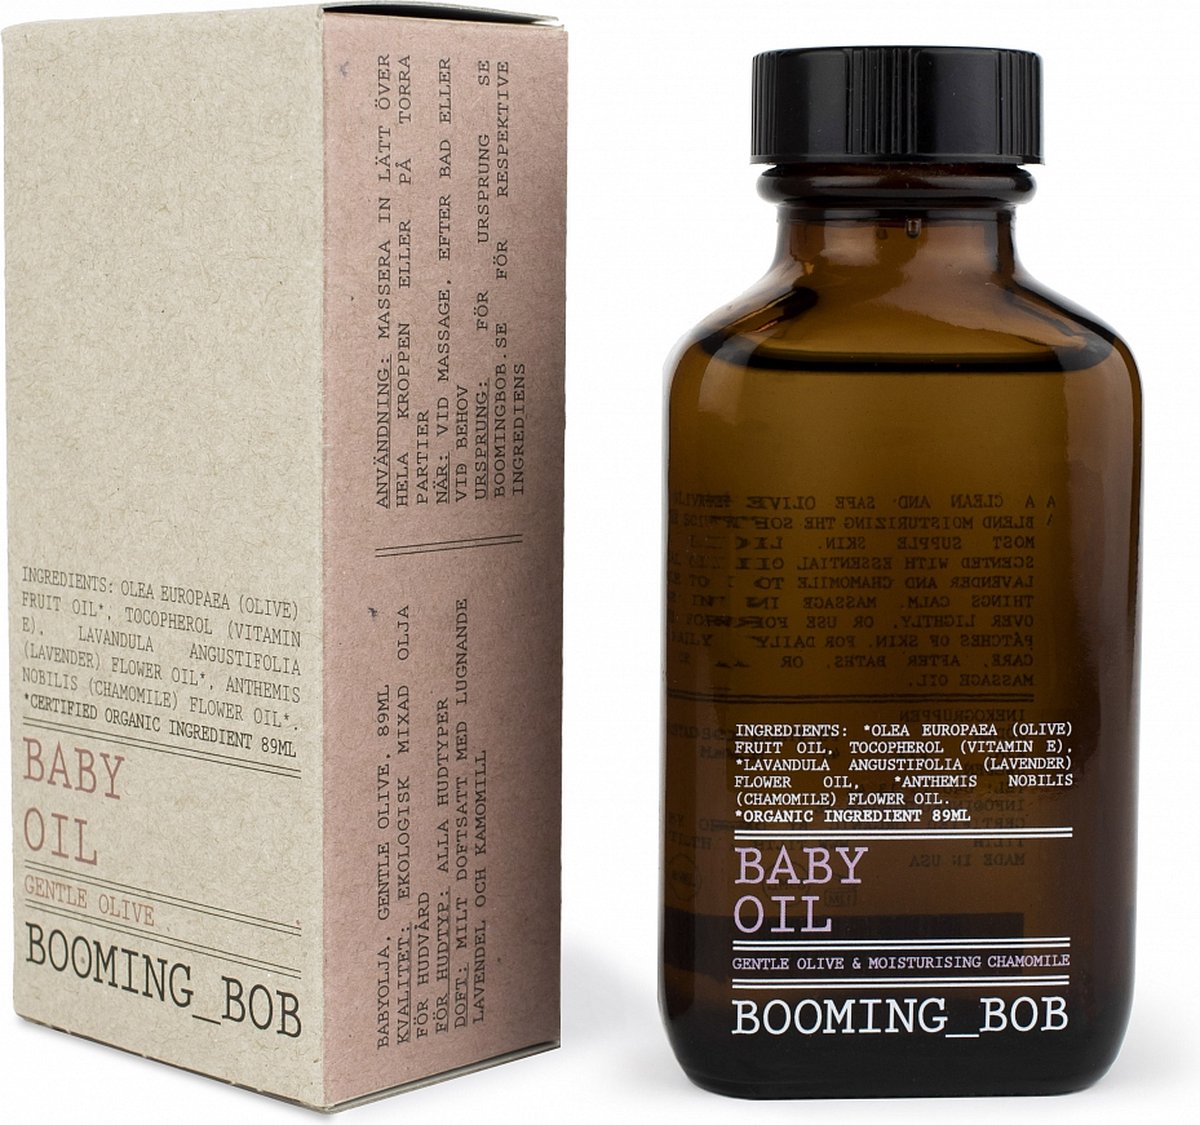 Booming Bob Baby Oil Gentle Olive 89ml